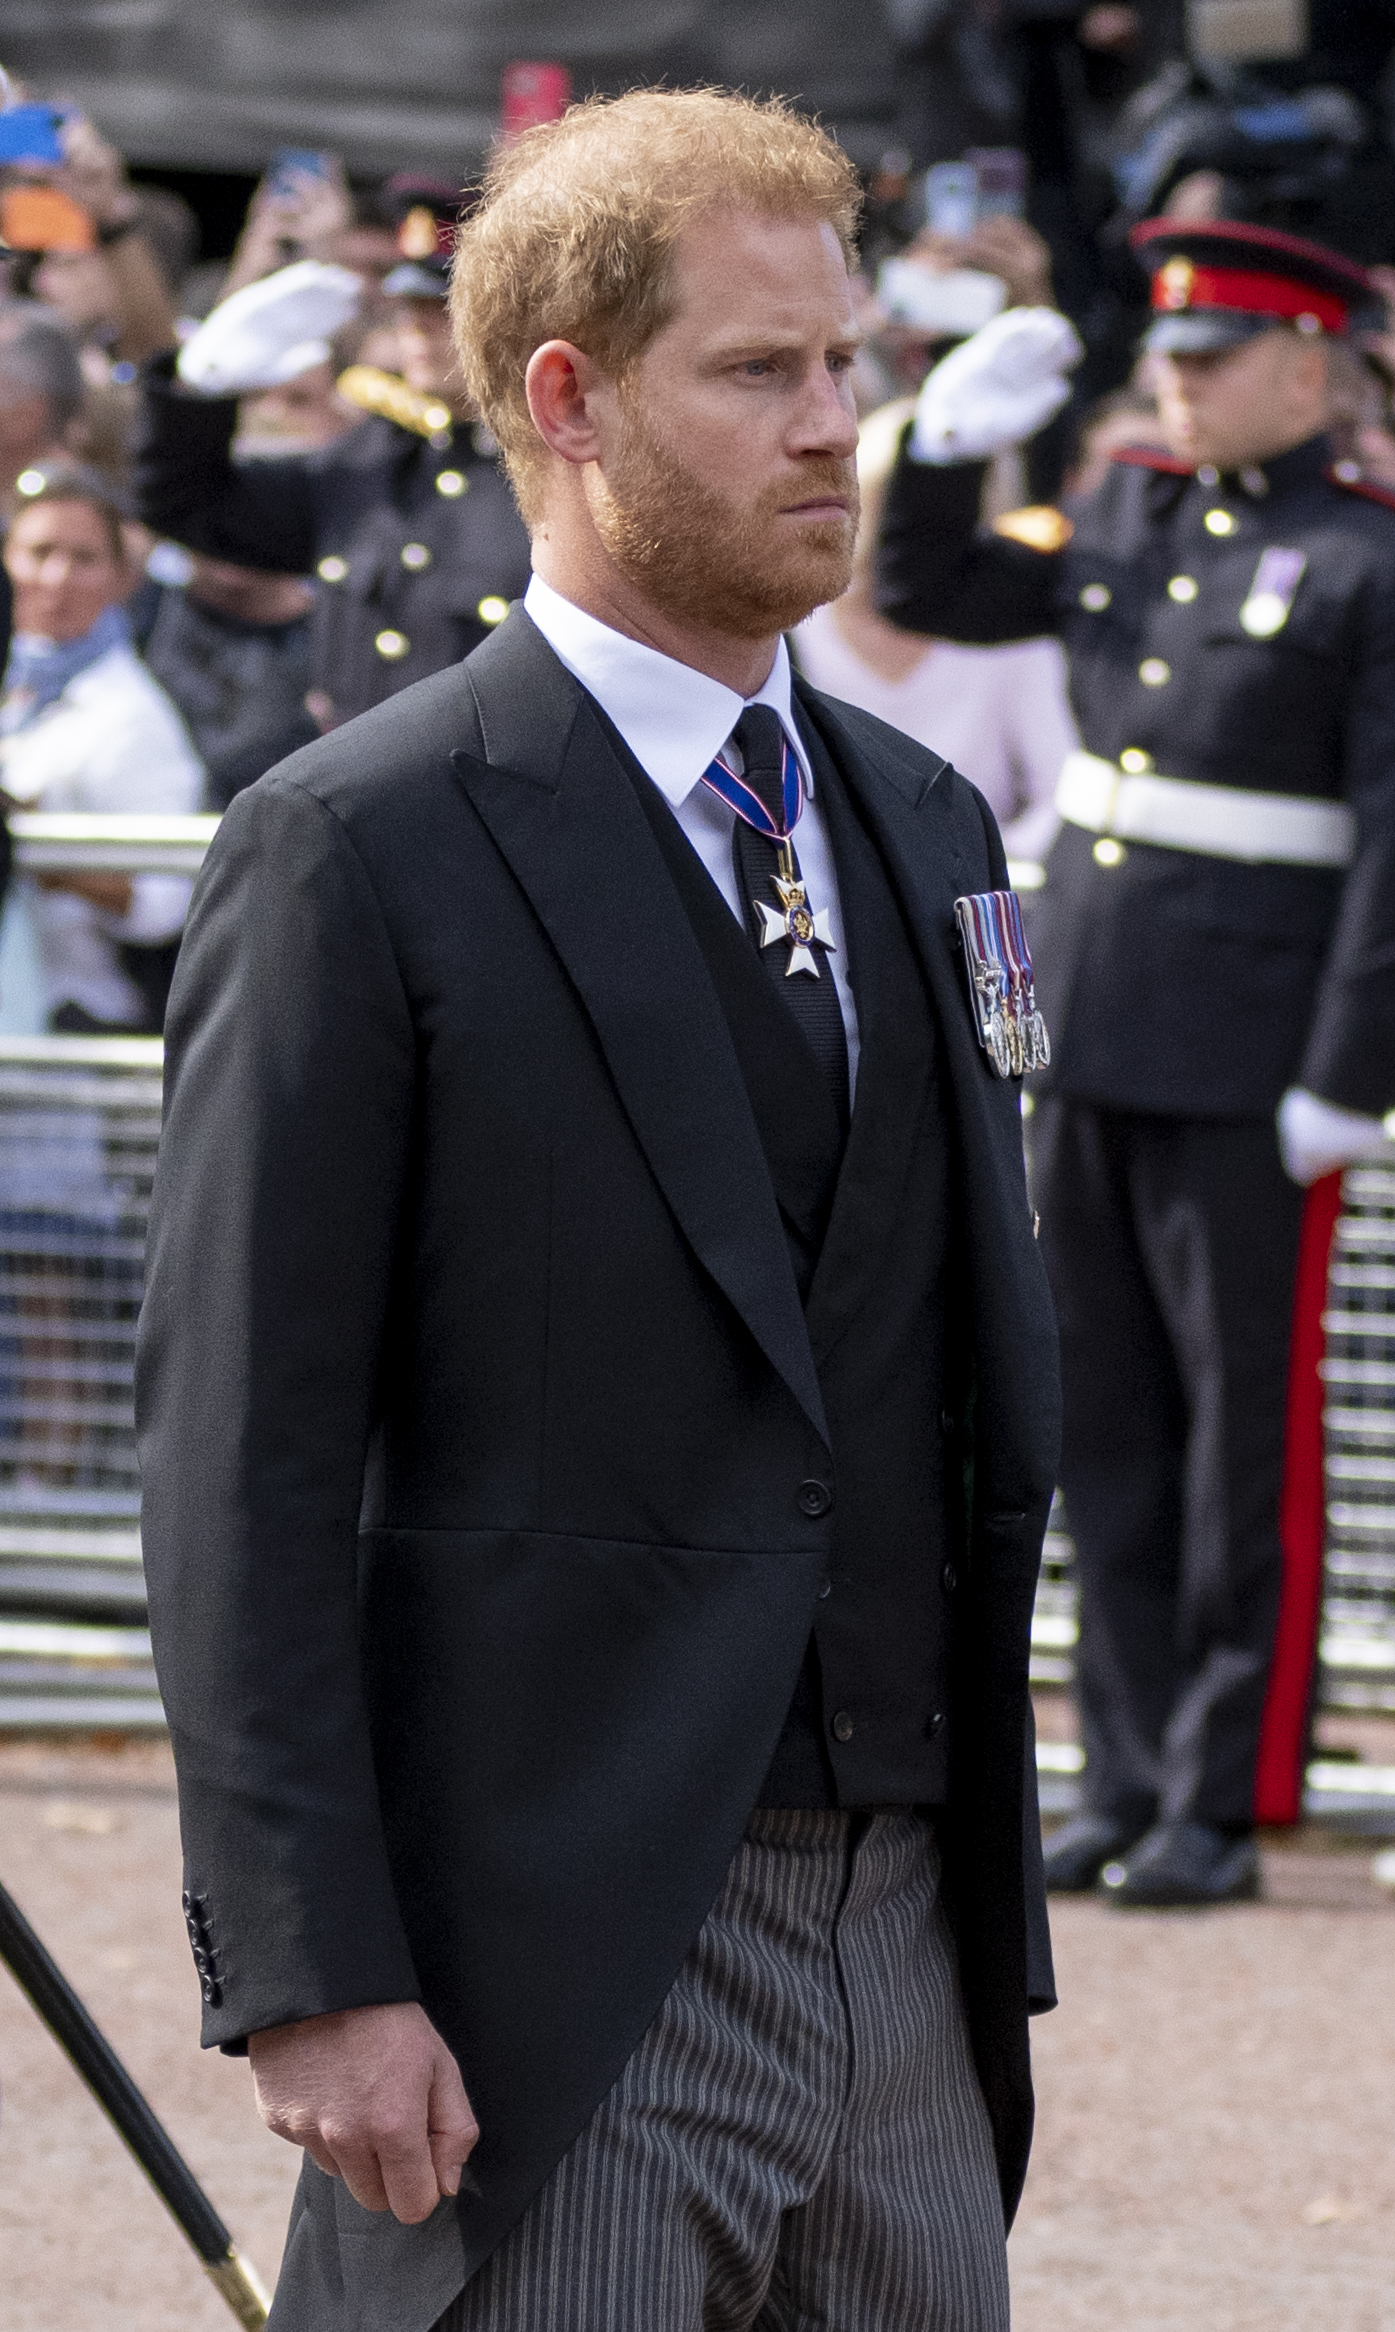 Prince Harry during the moment when Queen Elizabeth II's coffin was taken in procession in London, England on September 14, 2022 | Source: Getty Images